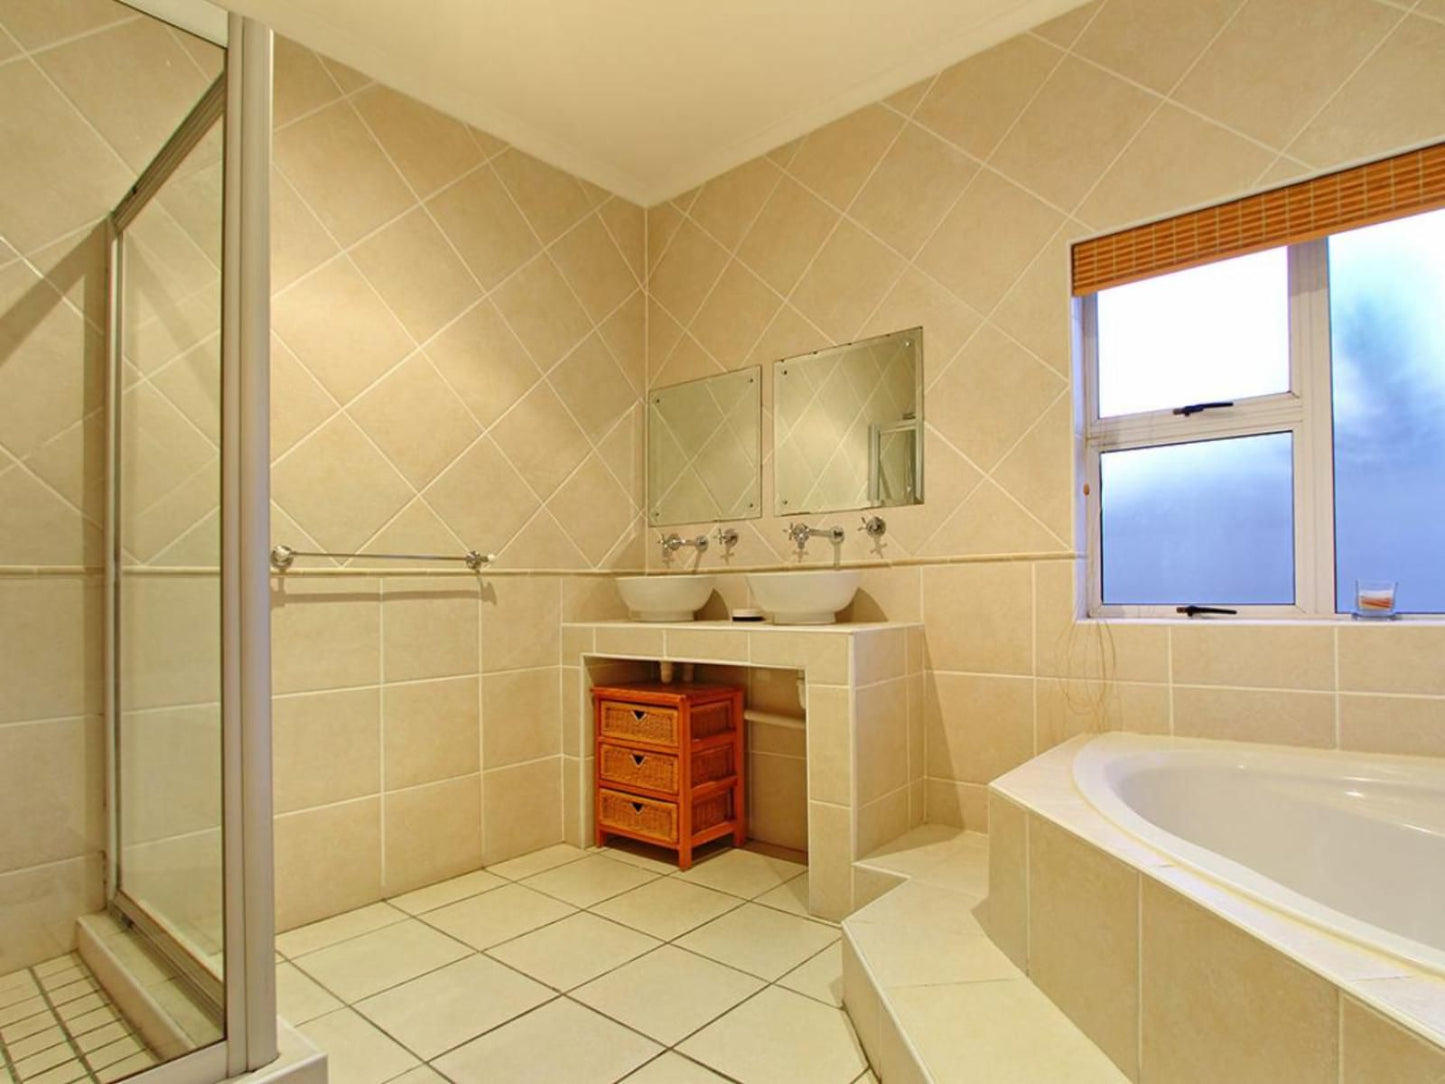 Durham Close 31 By Hostagents Blouberg Sands Blouberg Western Cape South Africa Bathroom